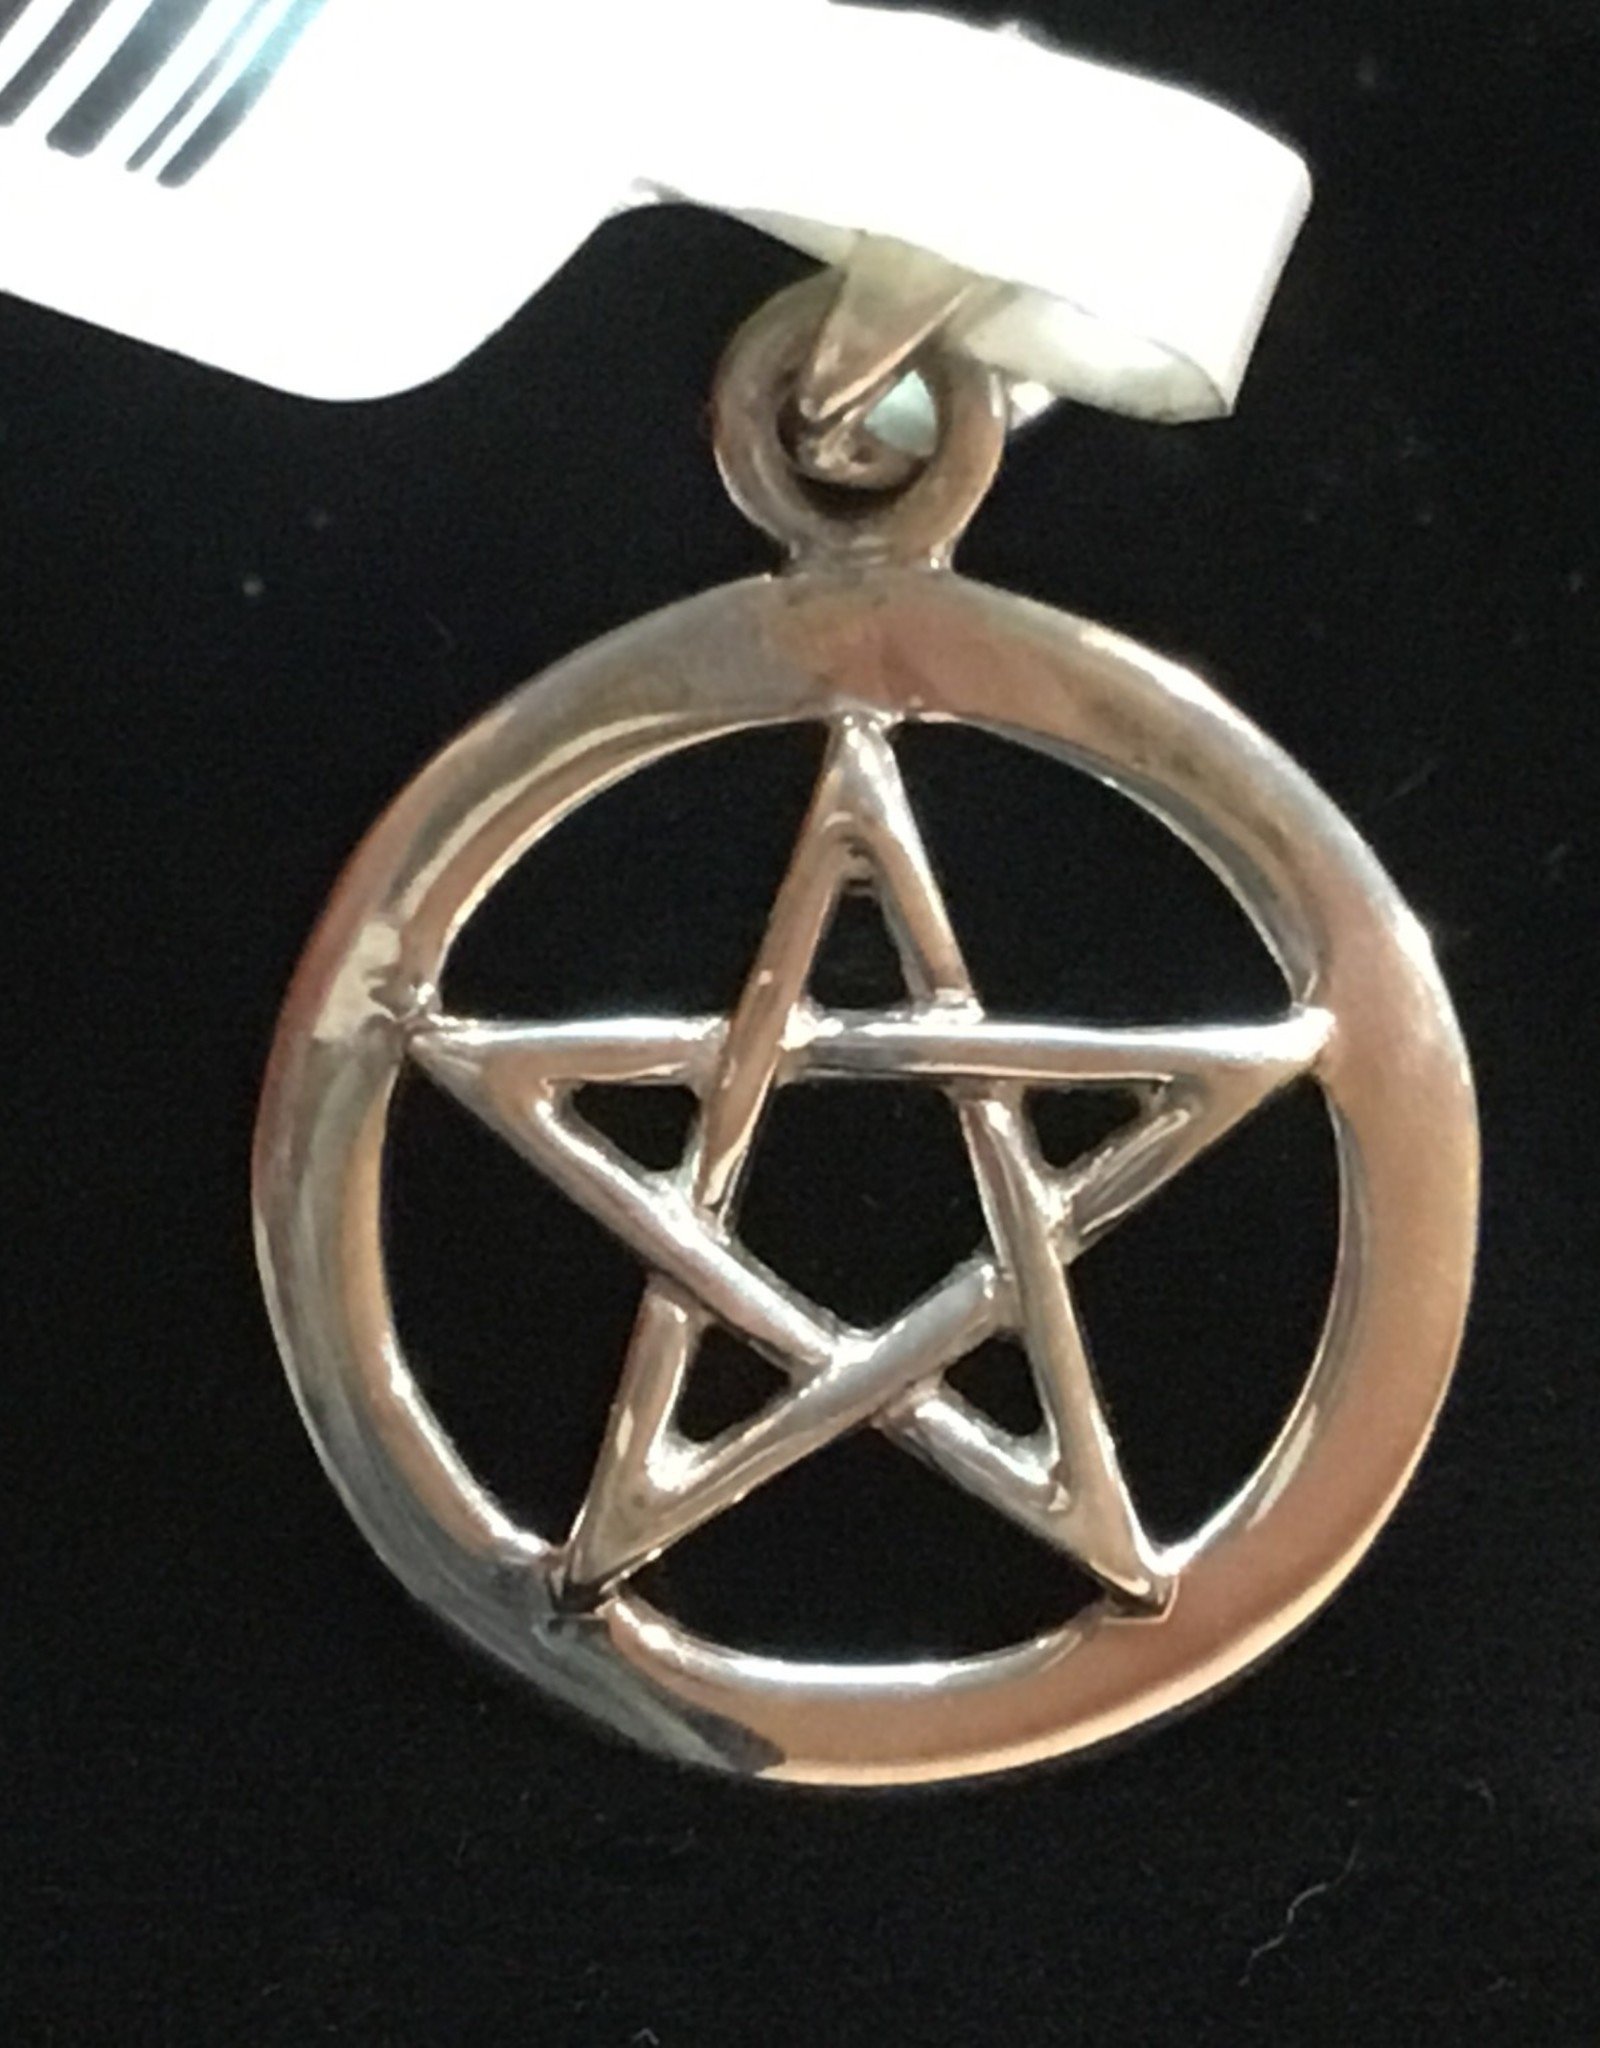 Pentacle Silver Pendant 3/4 inch